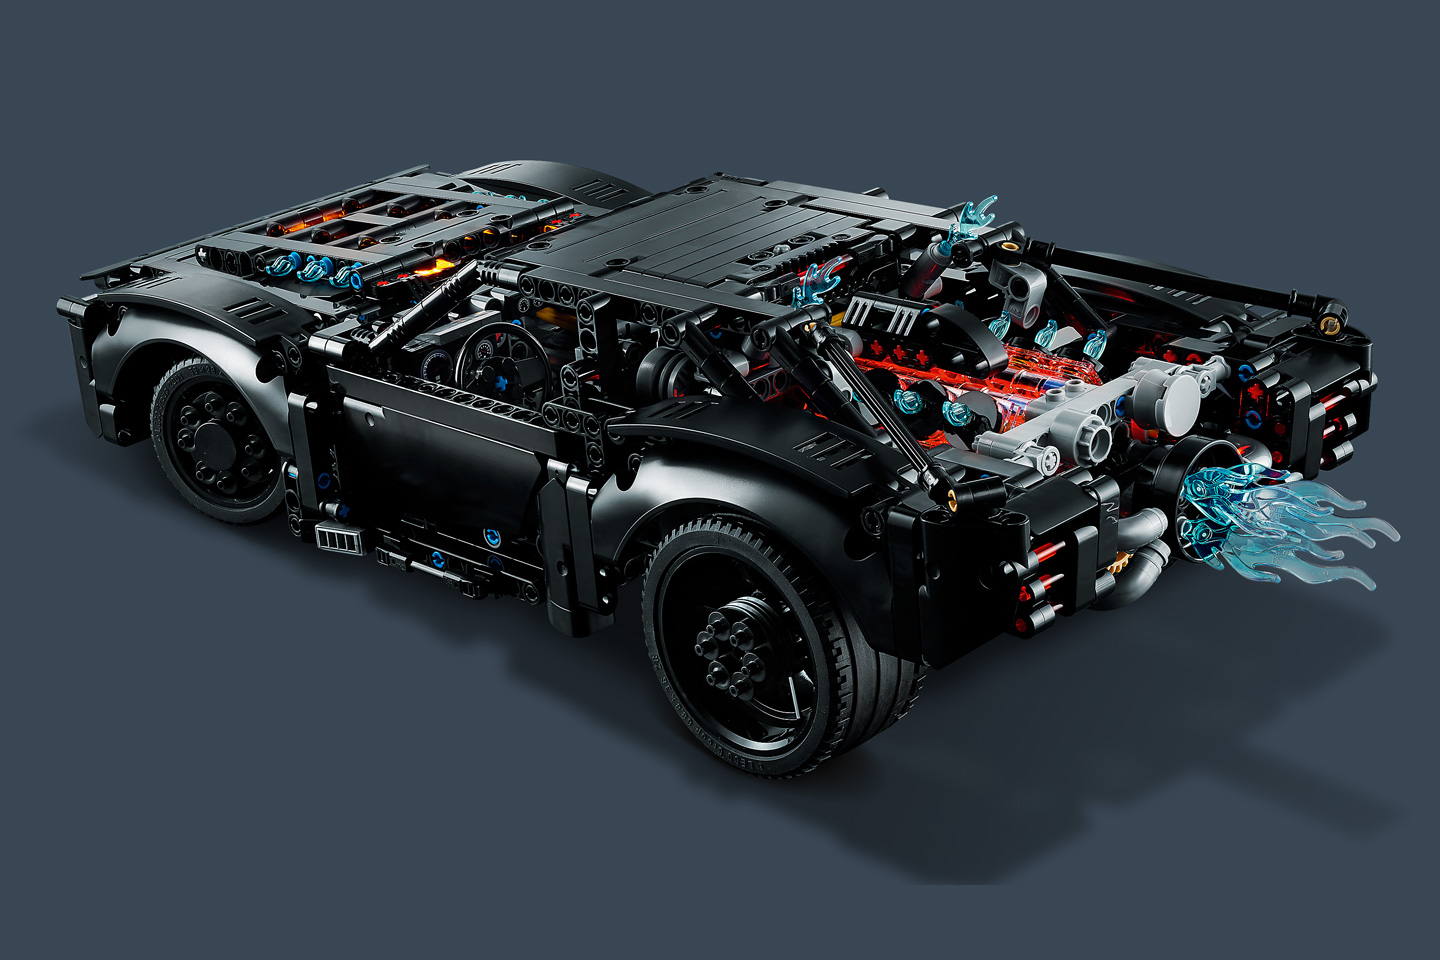 #The new LEGO Technic Batmobile is just as dark and sinister as the one in ‘The Batman’ movie